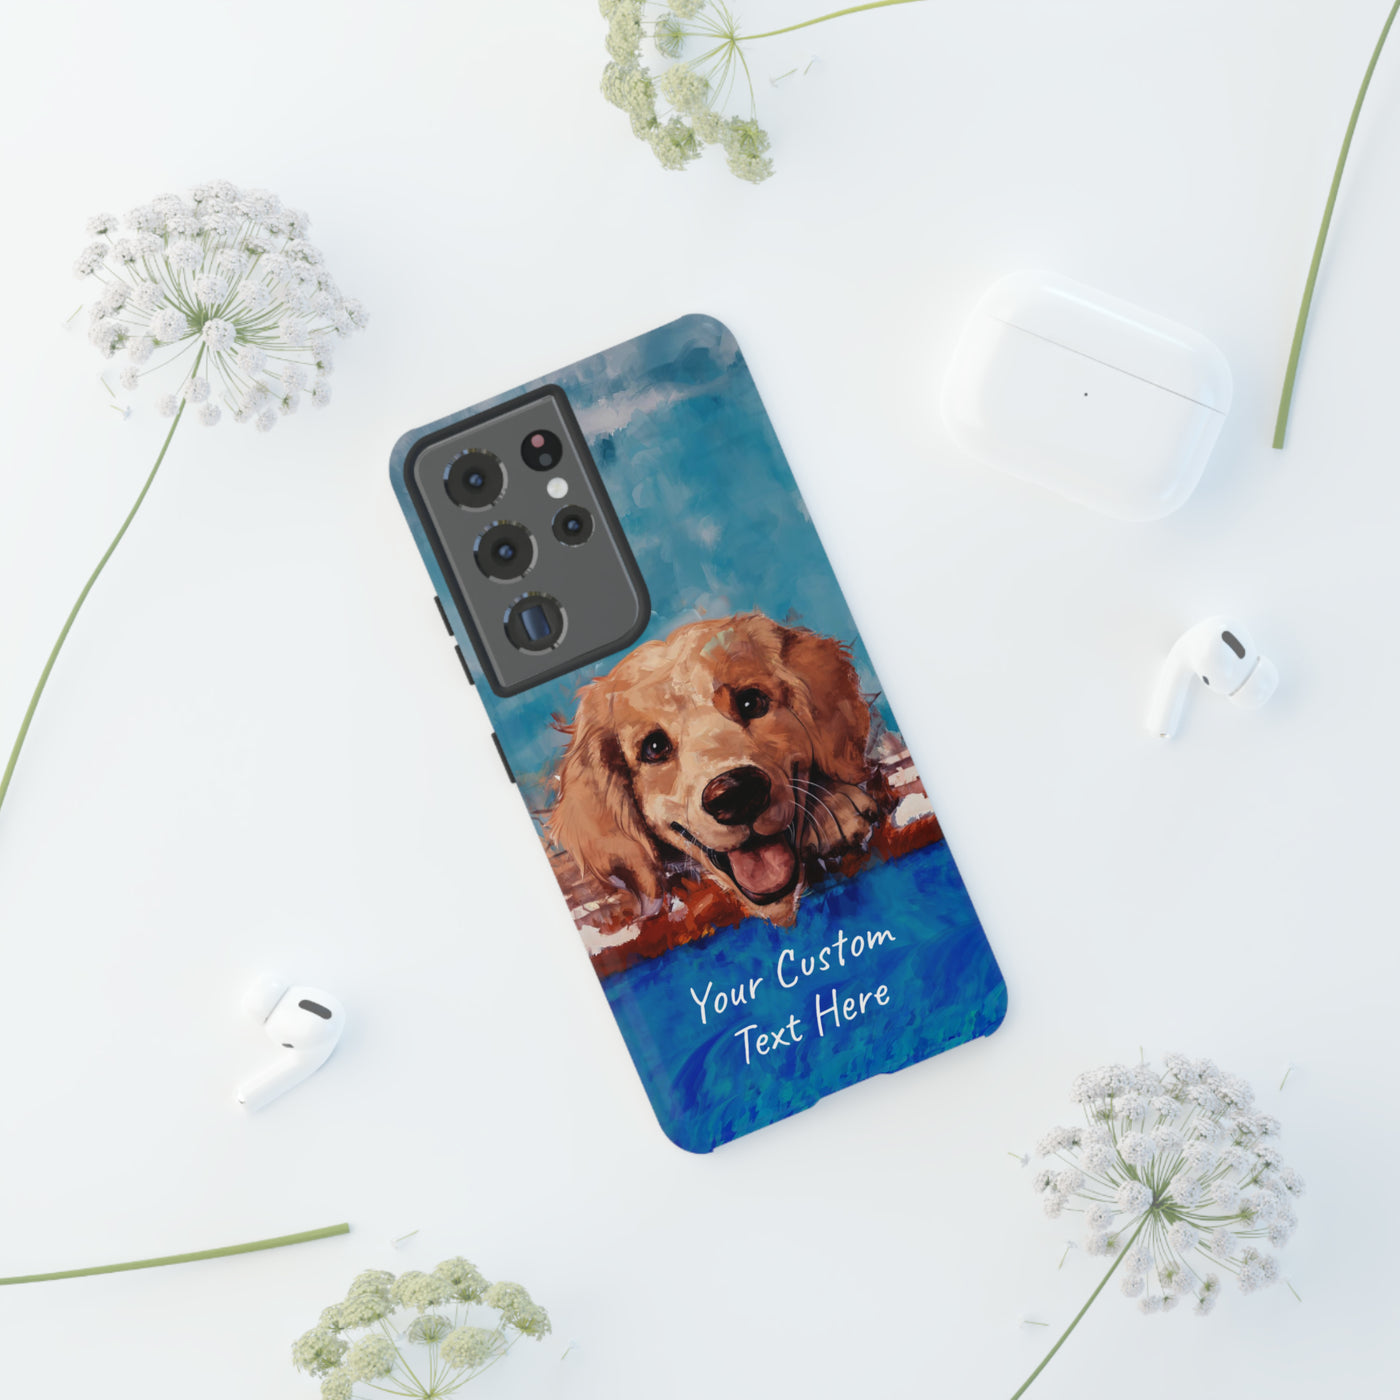 Personalize this Cute Samsung Phone Case | Golden Retriever Dog Samsung Phone Case | Galaxy S23, S22, S21, S20 | Personalized Samsung Cases